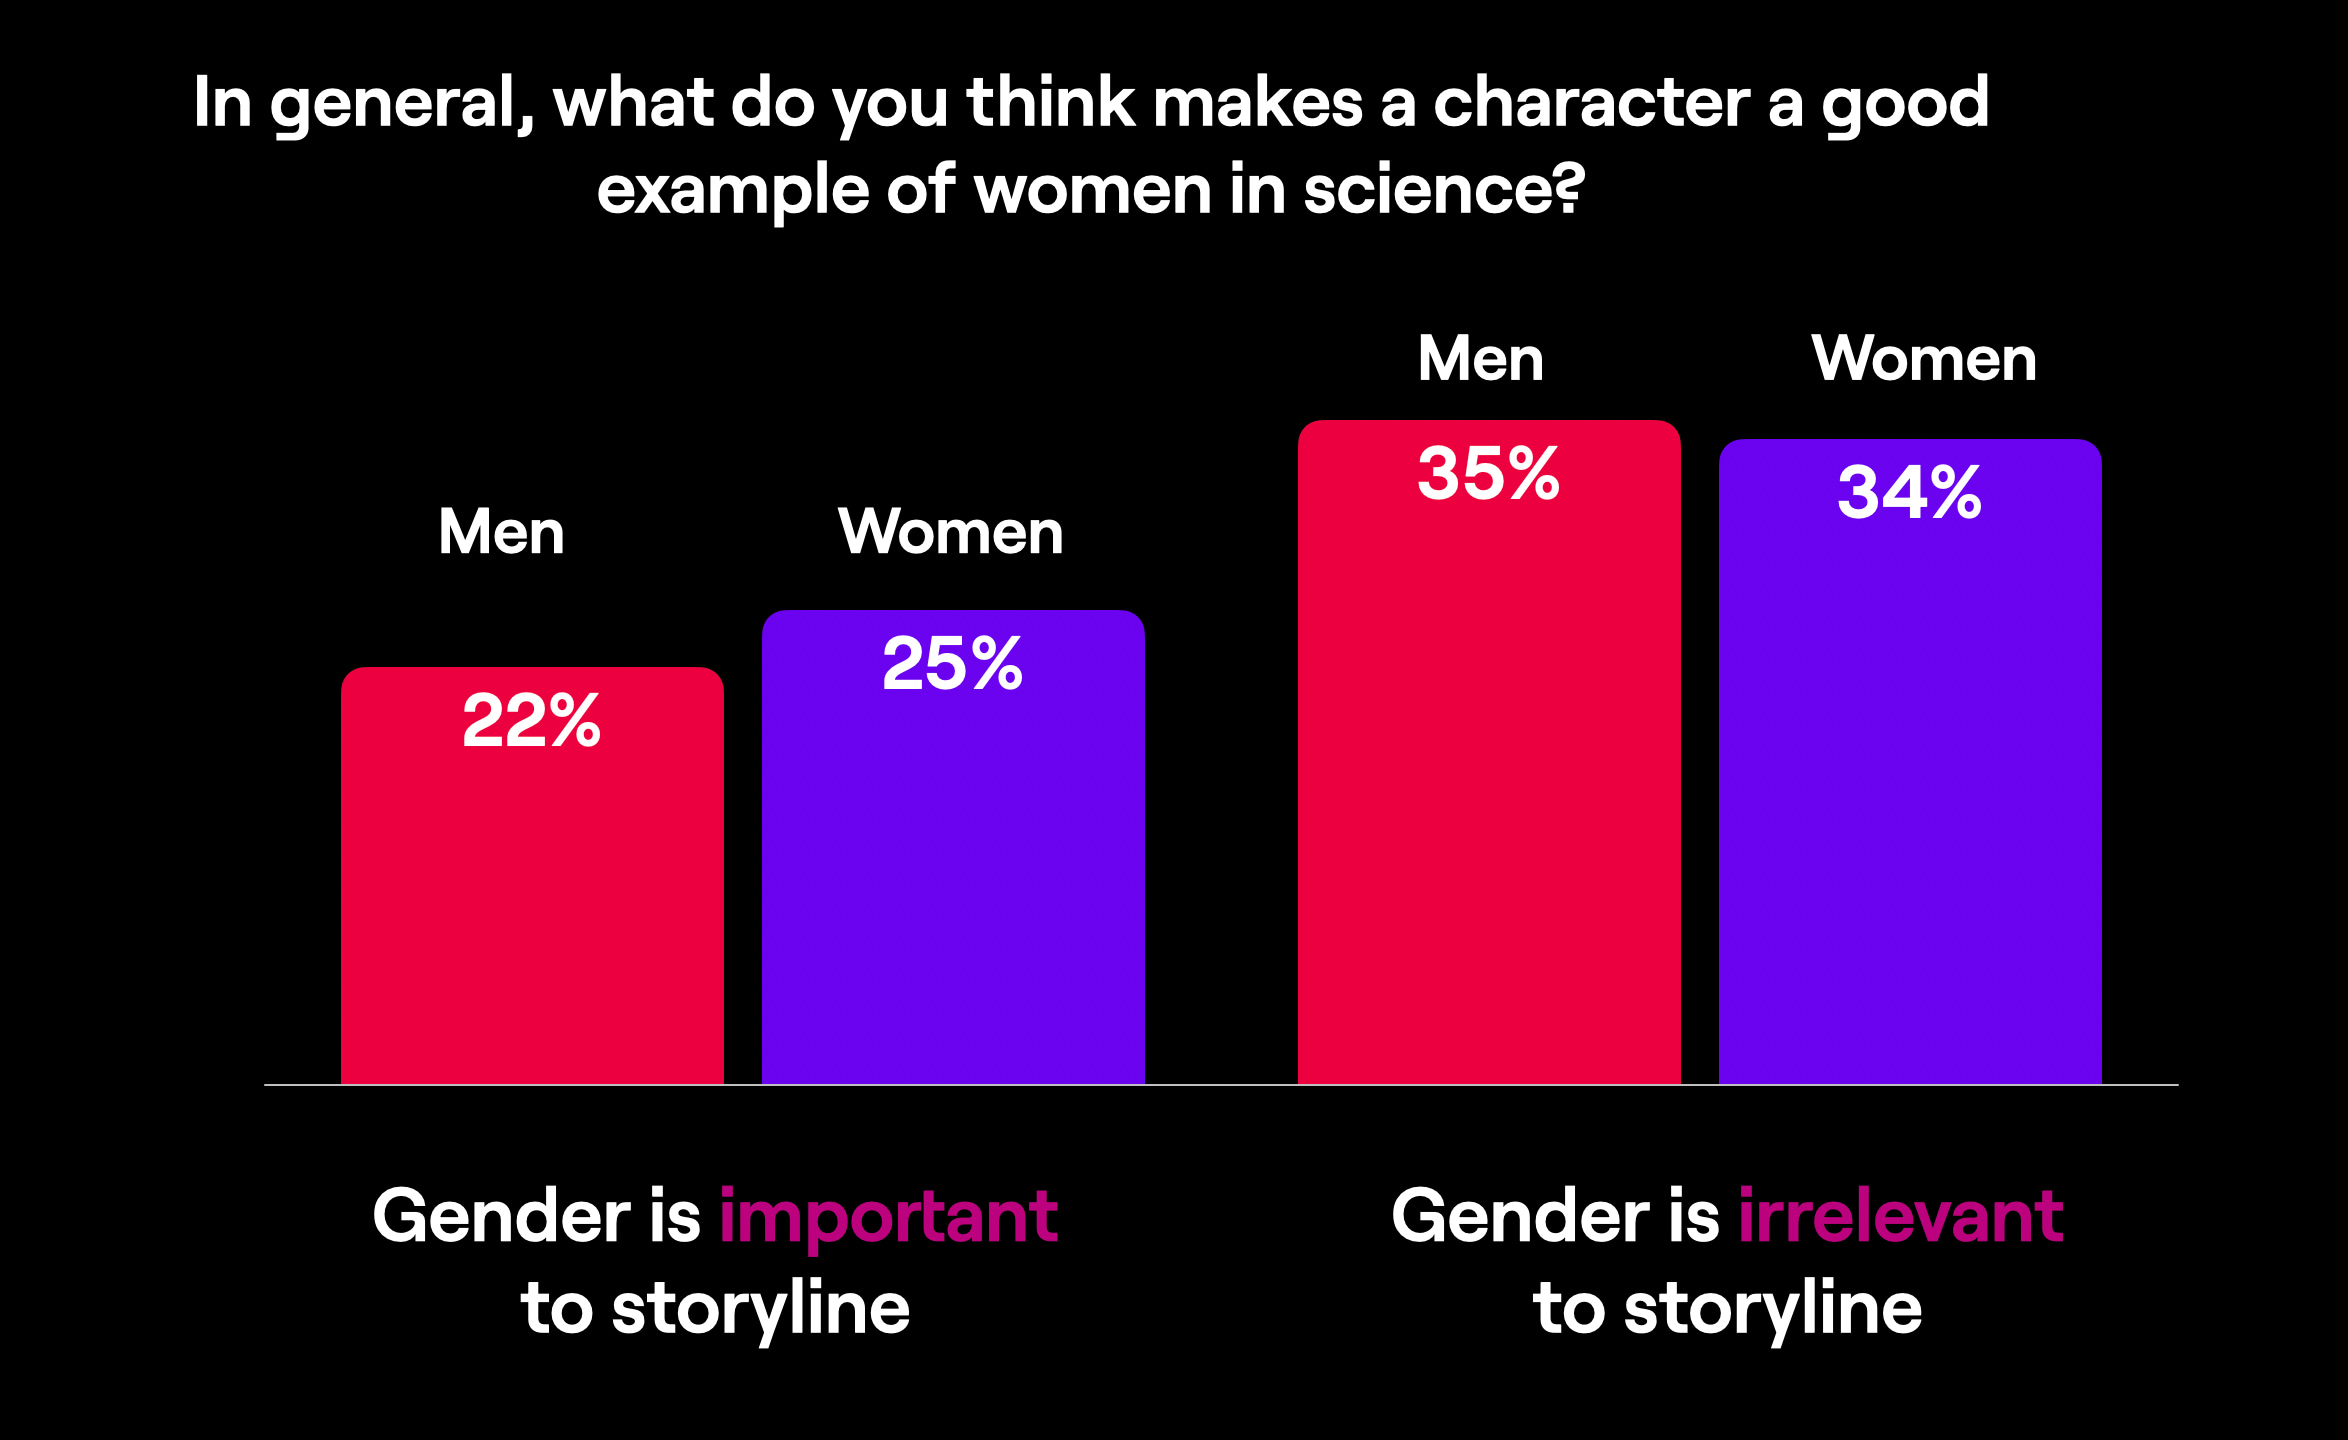 In general, what do you think makes a character a good example of women in science? Women see more importance in gender.